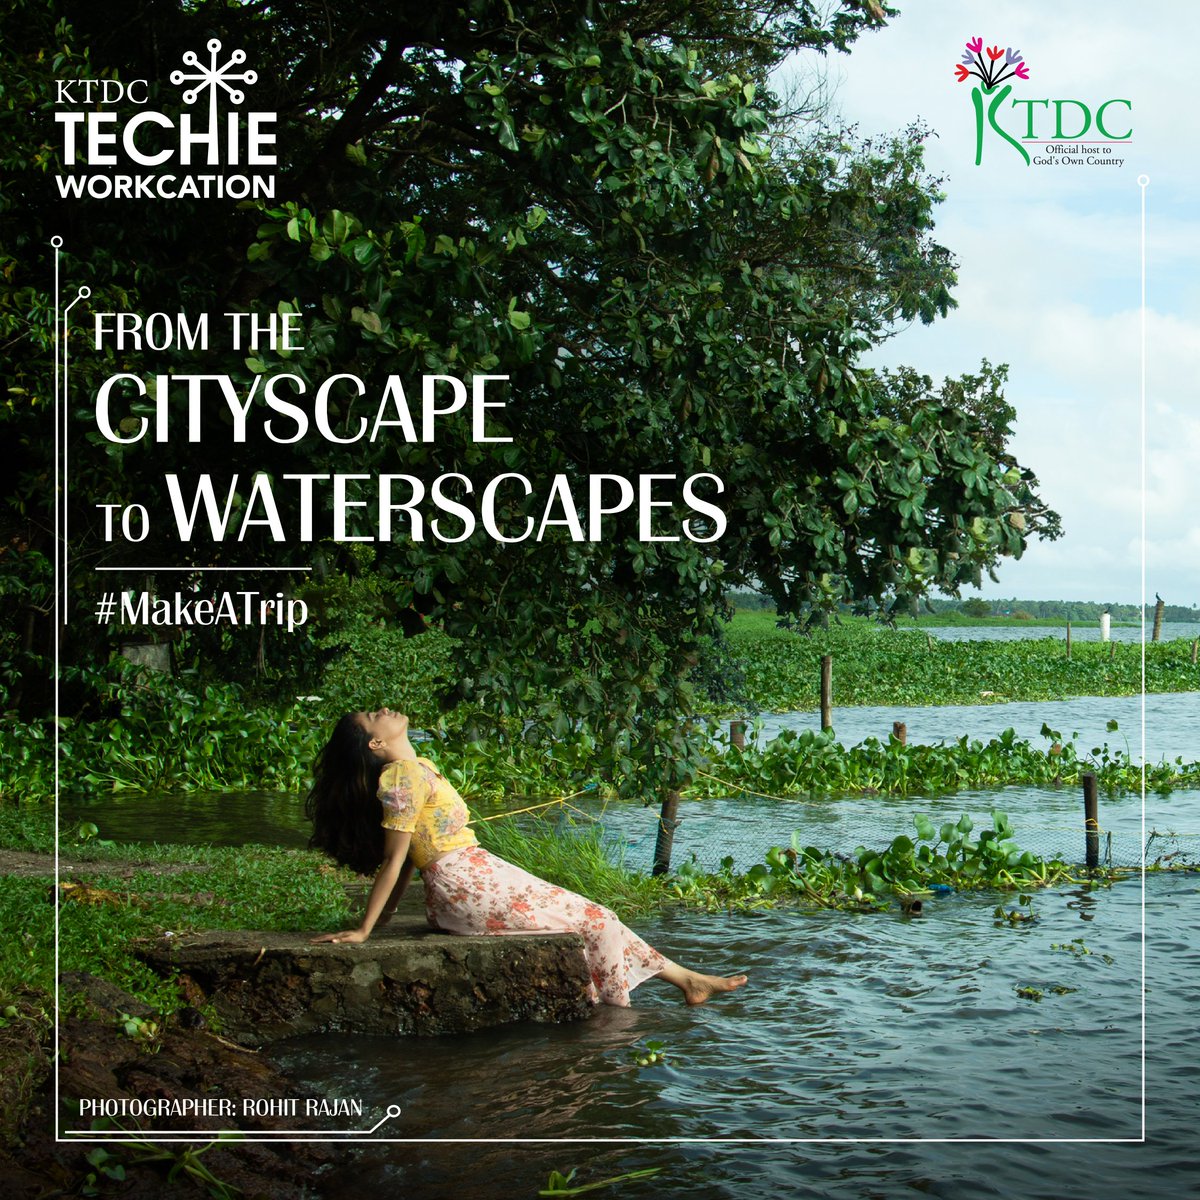 Work or play? Why not both? Book a KTDC Techie Workcation package at Waterscapes and flow into the perfect work-life balance amidst the tranquil backwaters. Email: centralreservations@ktdc.com for more details #keralaitparks #ktdc #makeatrip

Photographer: Rohit Rajan